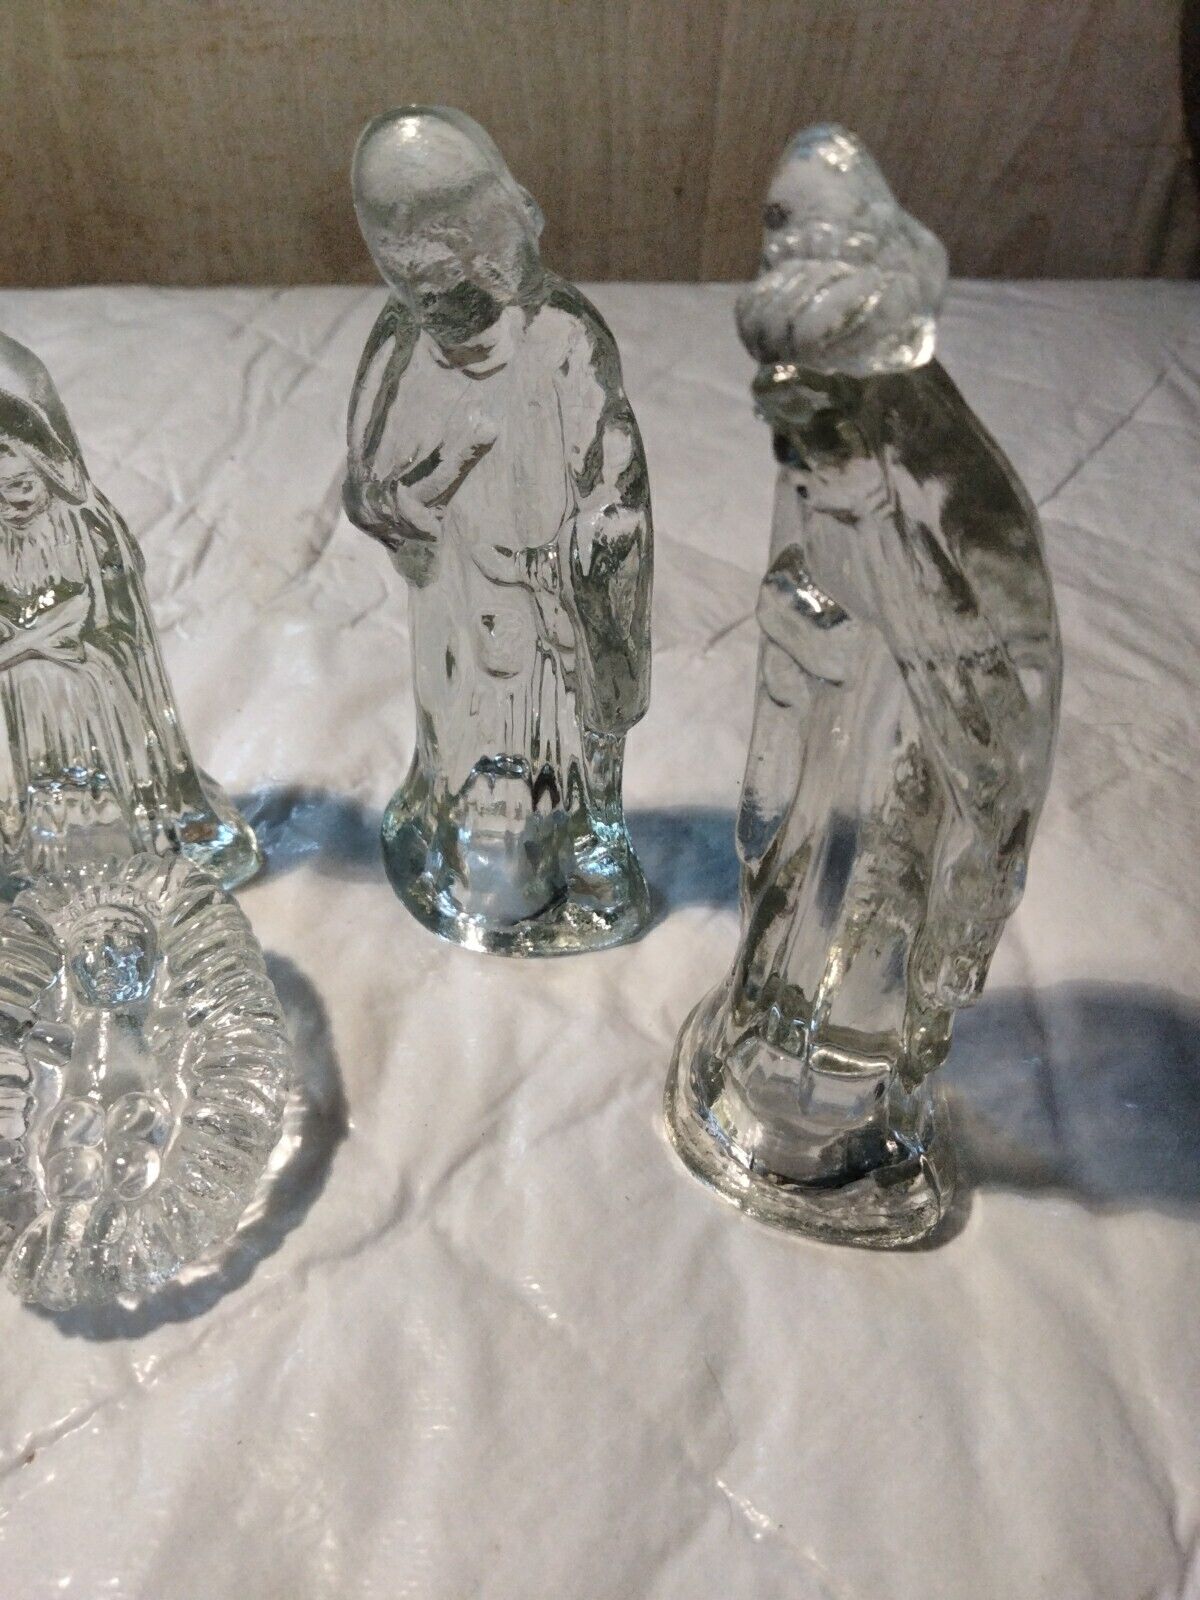 Vintage 1990s House of Lloyd Christmas Clear Glass Nativity Set of 6 Figurines